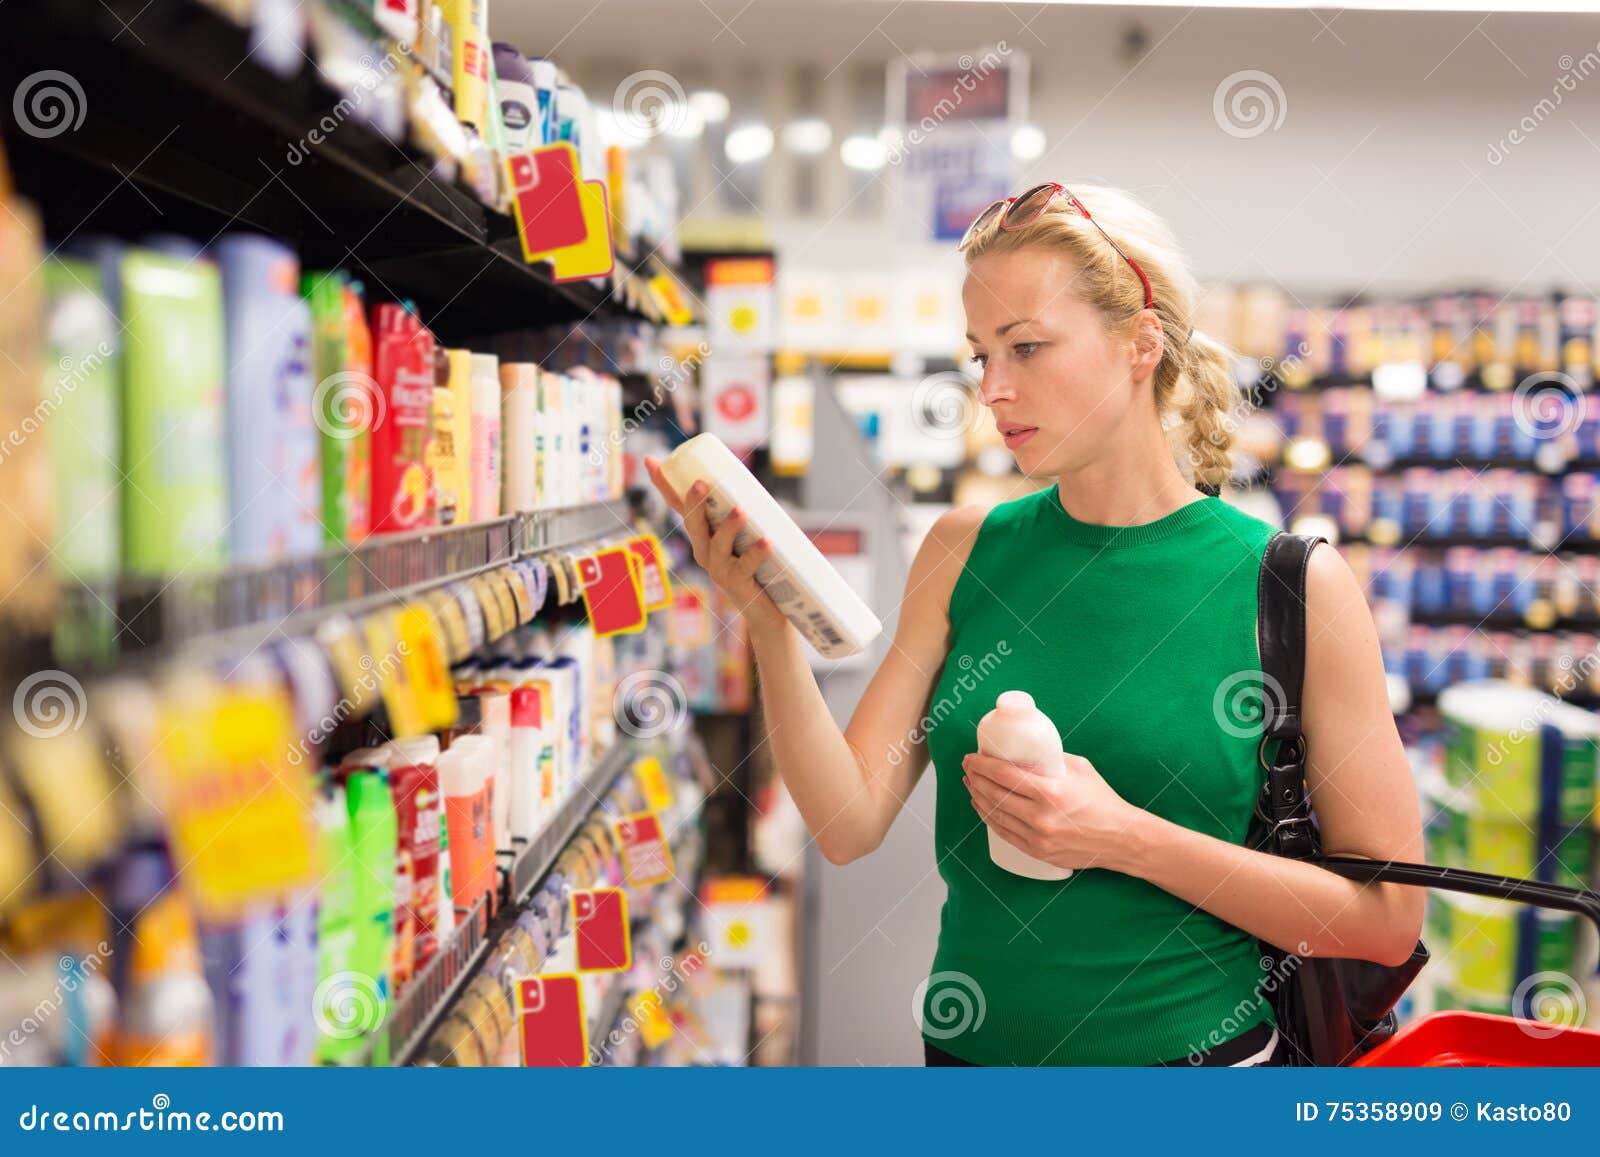 woman shopping personal hygiene products at supermarket.